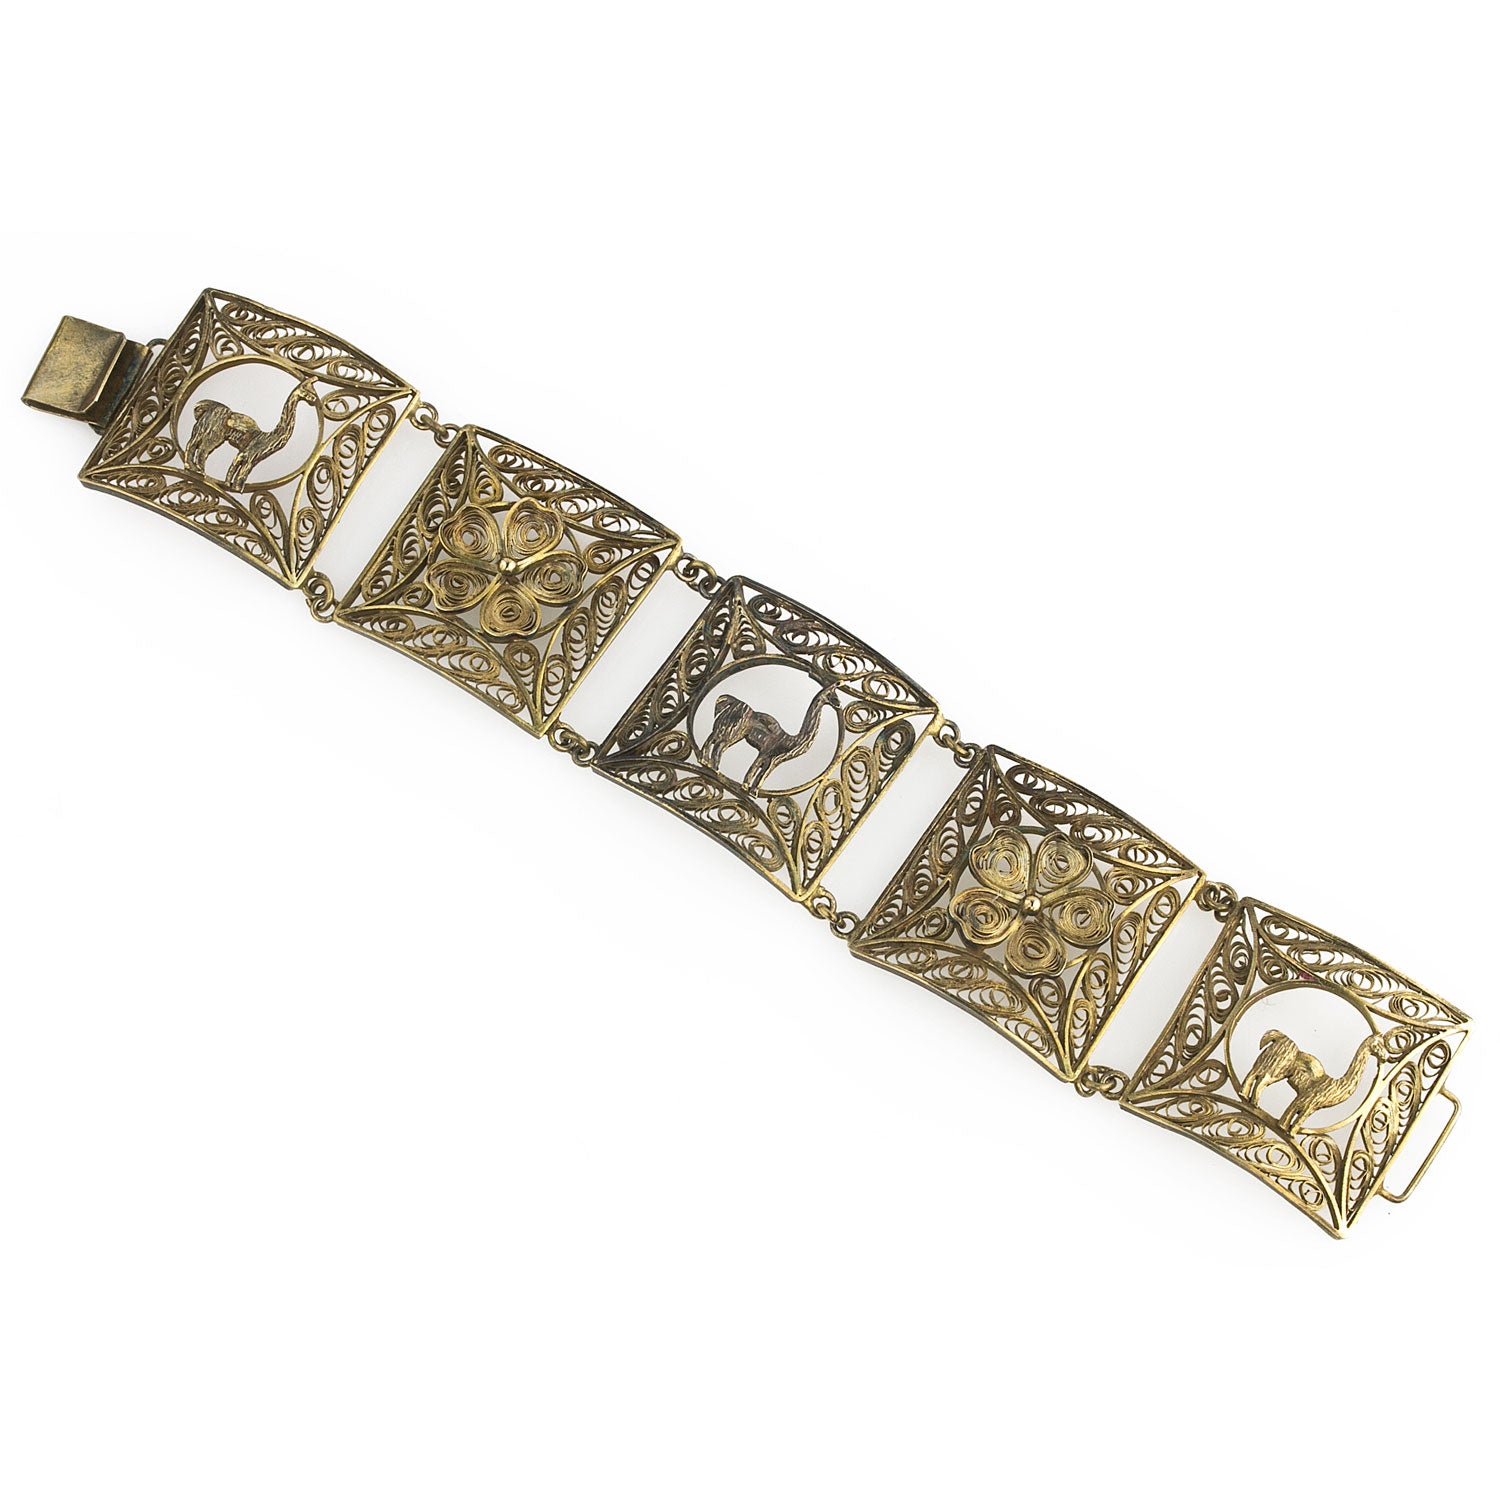 Vintage bracelet with llamas and rosettes, goldwashed silver vermeil f –  Earthly Adornments